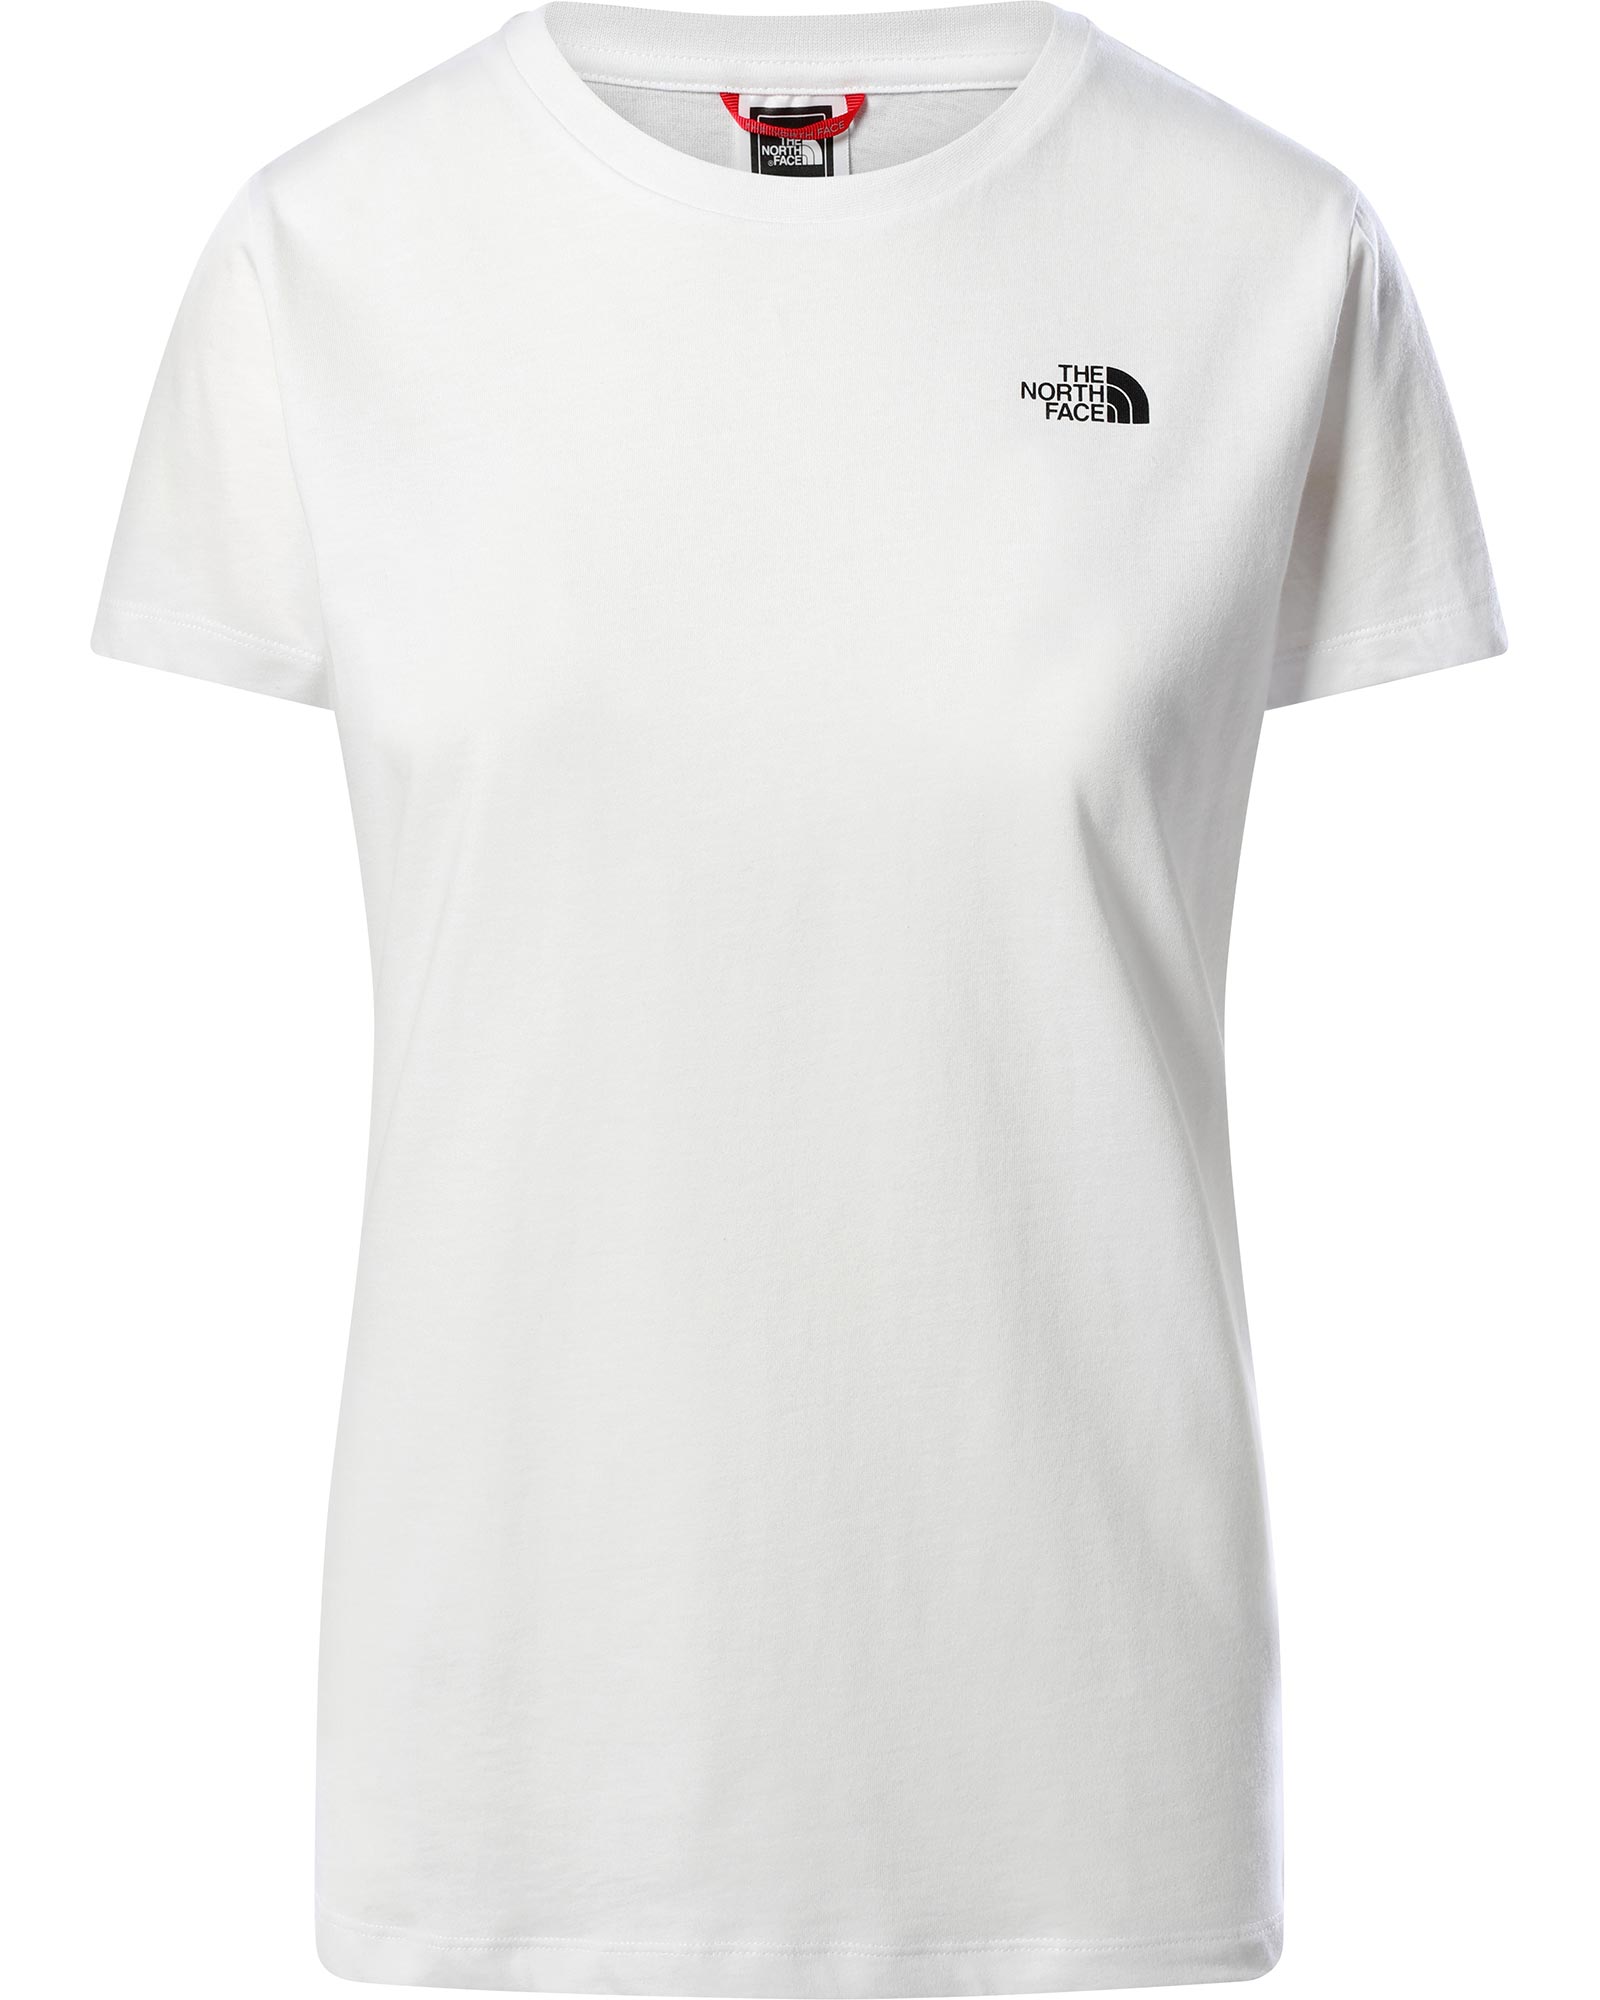 The North Face Simple Dome Women’s T Shirt - TNF White XL